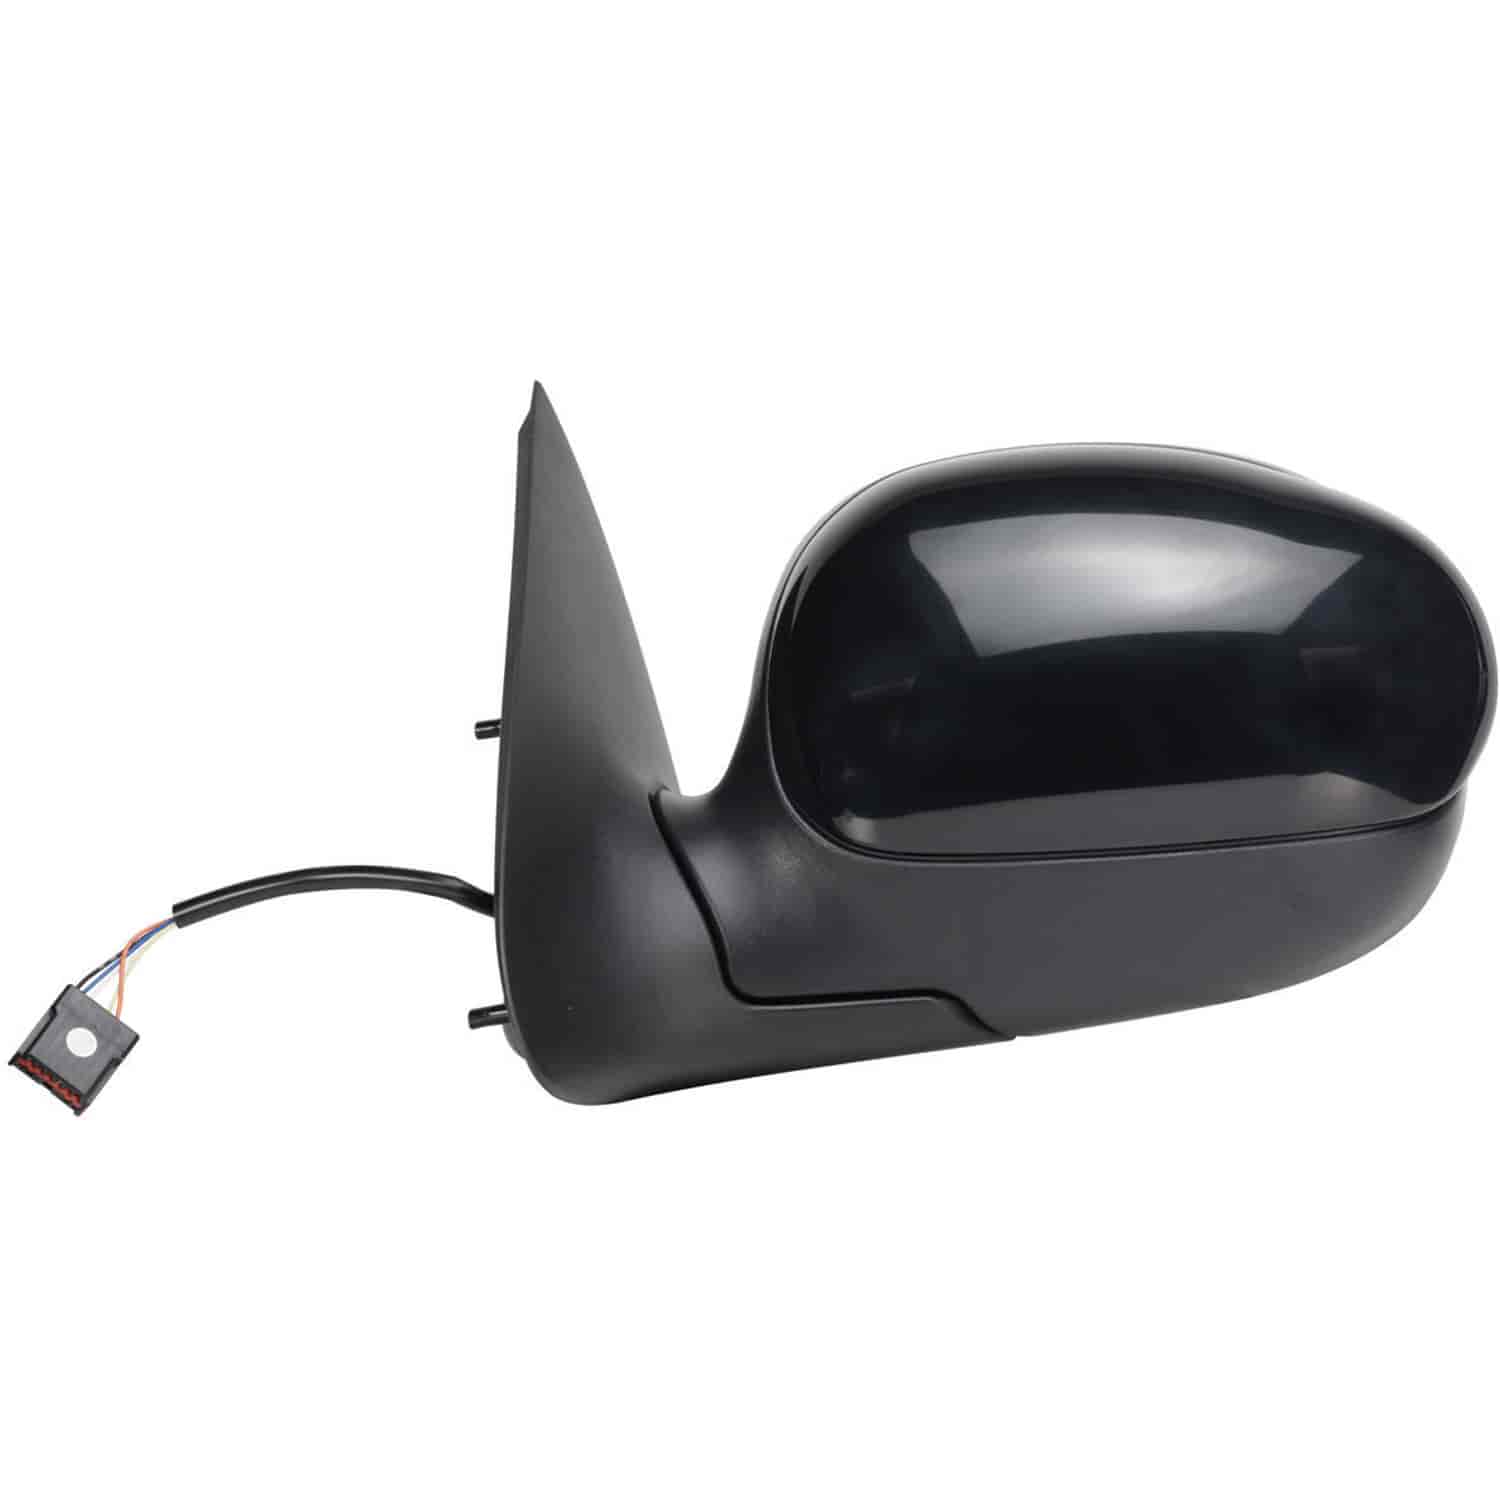 OEM Style Replacement mirror for 00-03 Ford F150 F250 LD Pick-Up driver side mirror tested to fit an